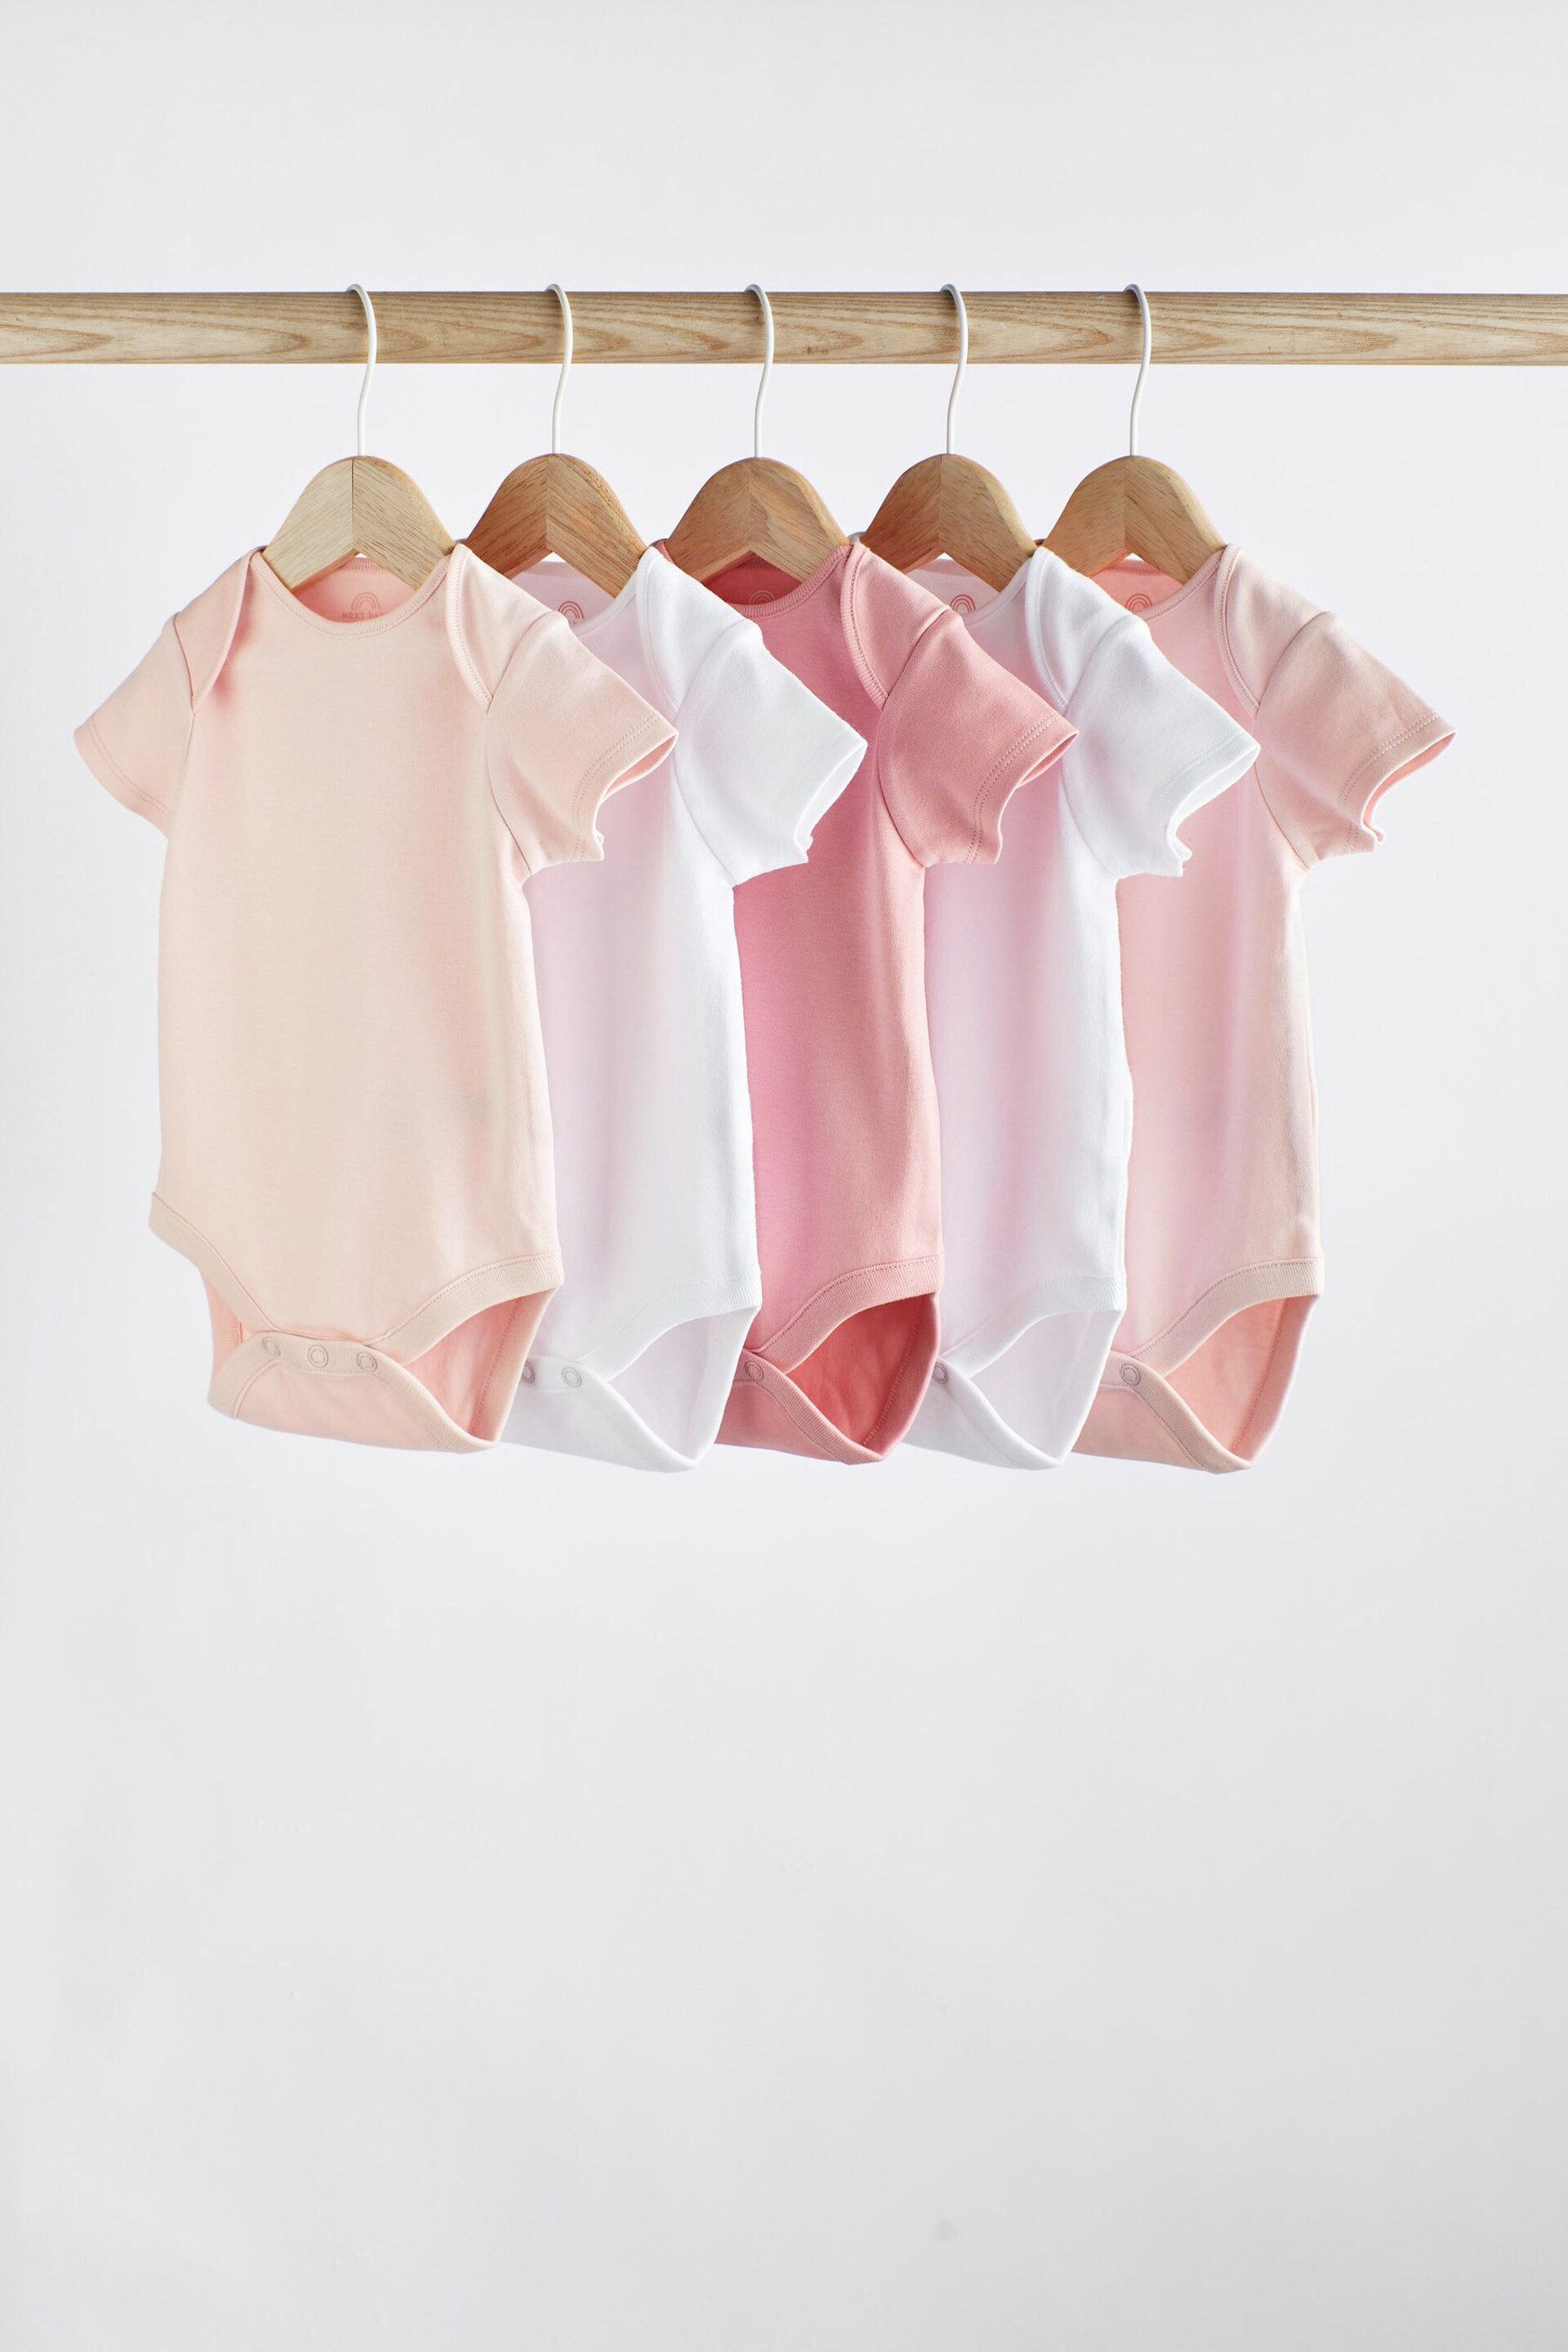 Pink/White 5 Pack Short Sleeve Baby Bodysuits - Image 1 of 6